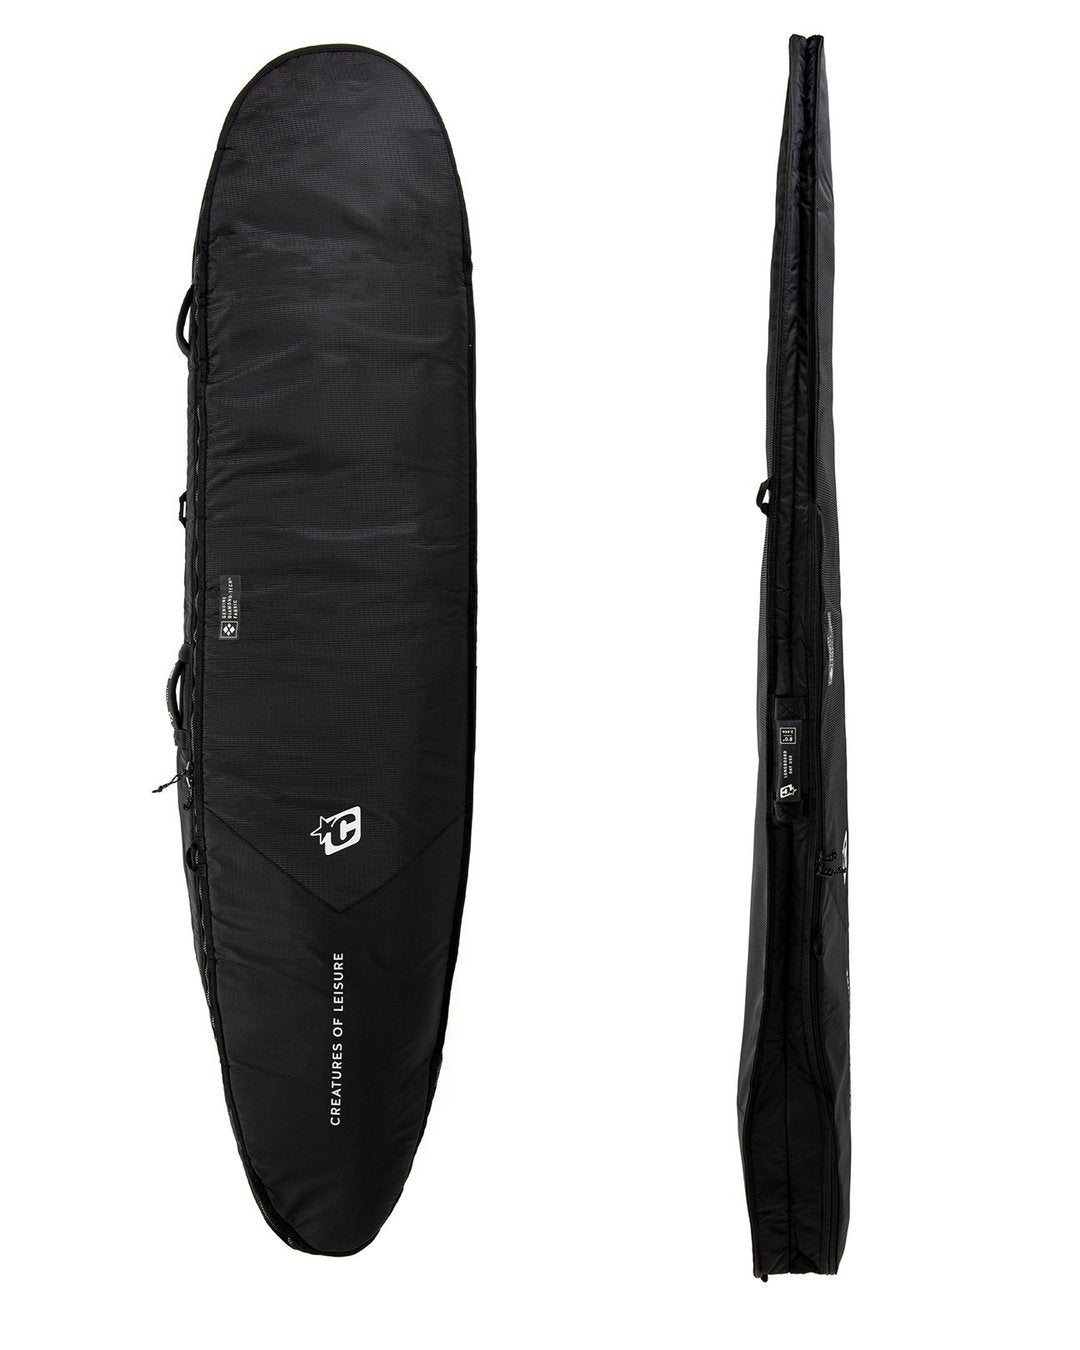 Creatures LONGBOARD DAY USE DT2.0 9’6” : BLACK SILVER - Board Store CreaturesBoardcover  